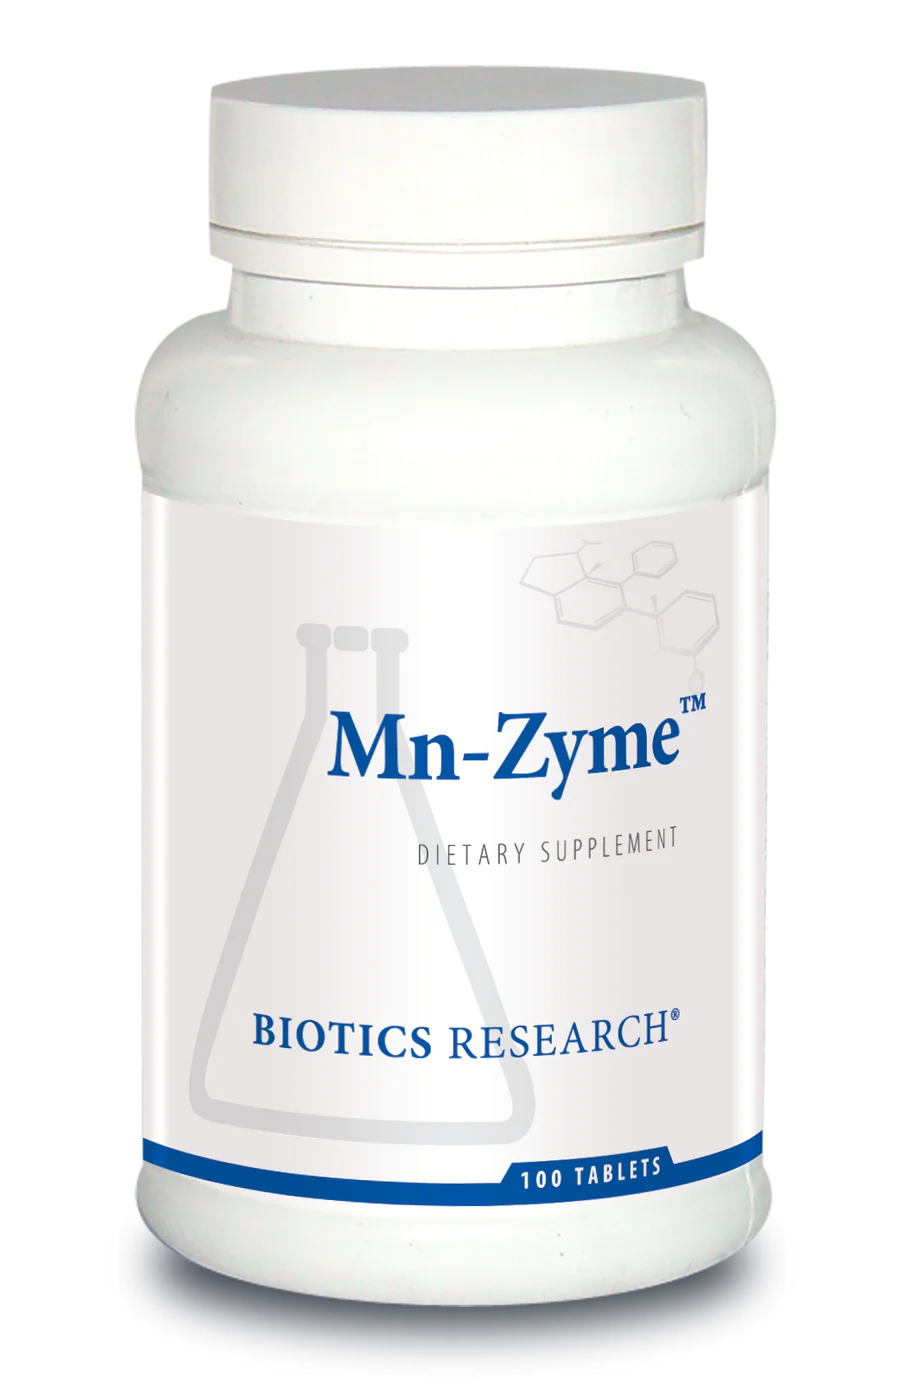 Mn-Zyme™ (10 mg)